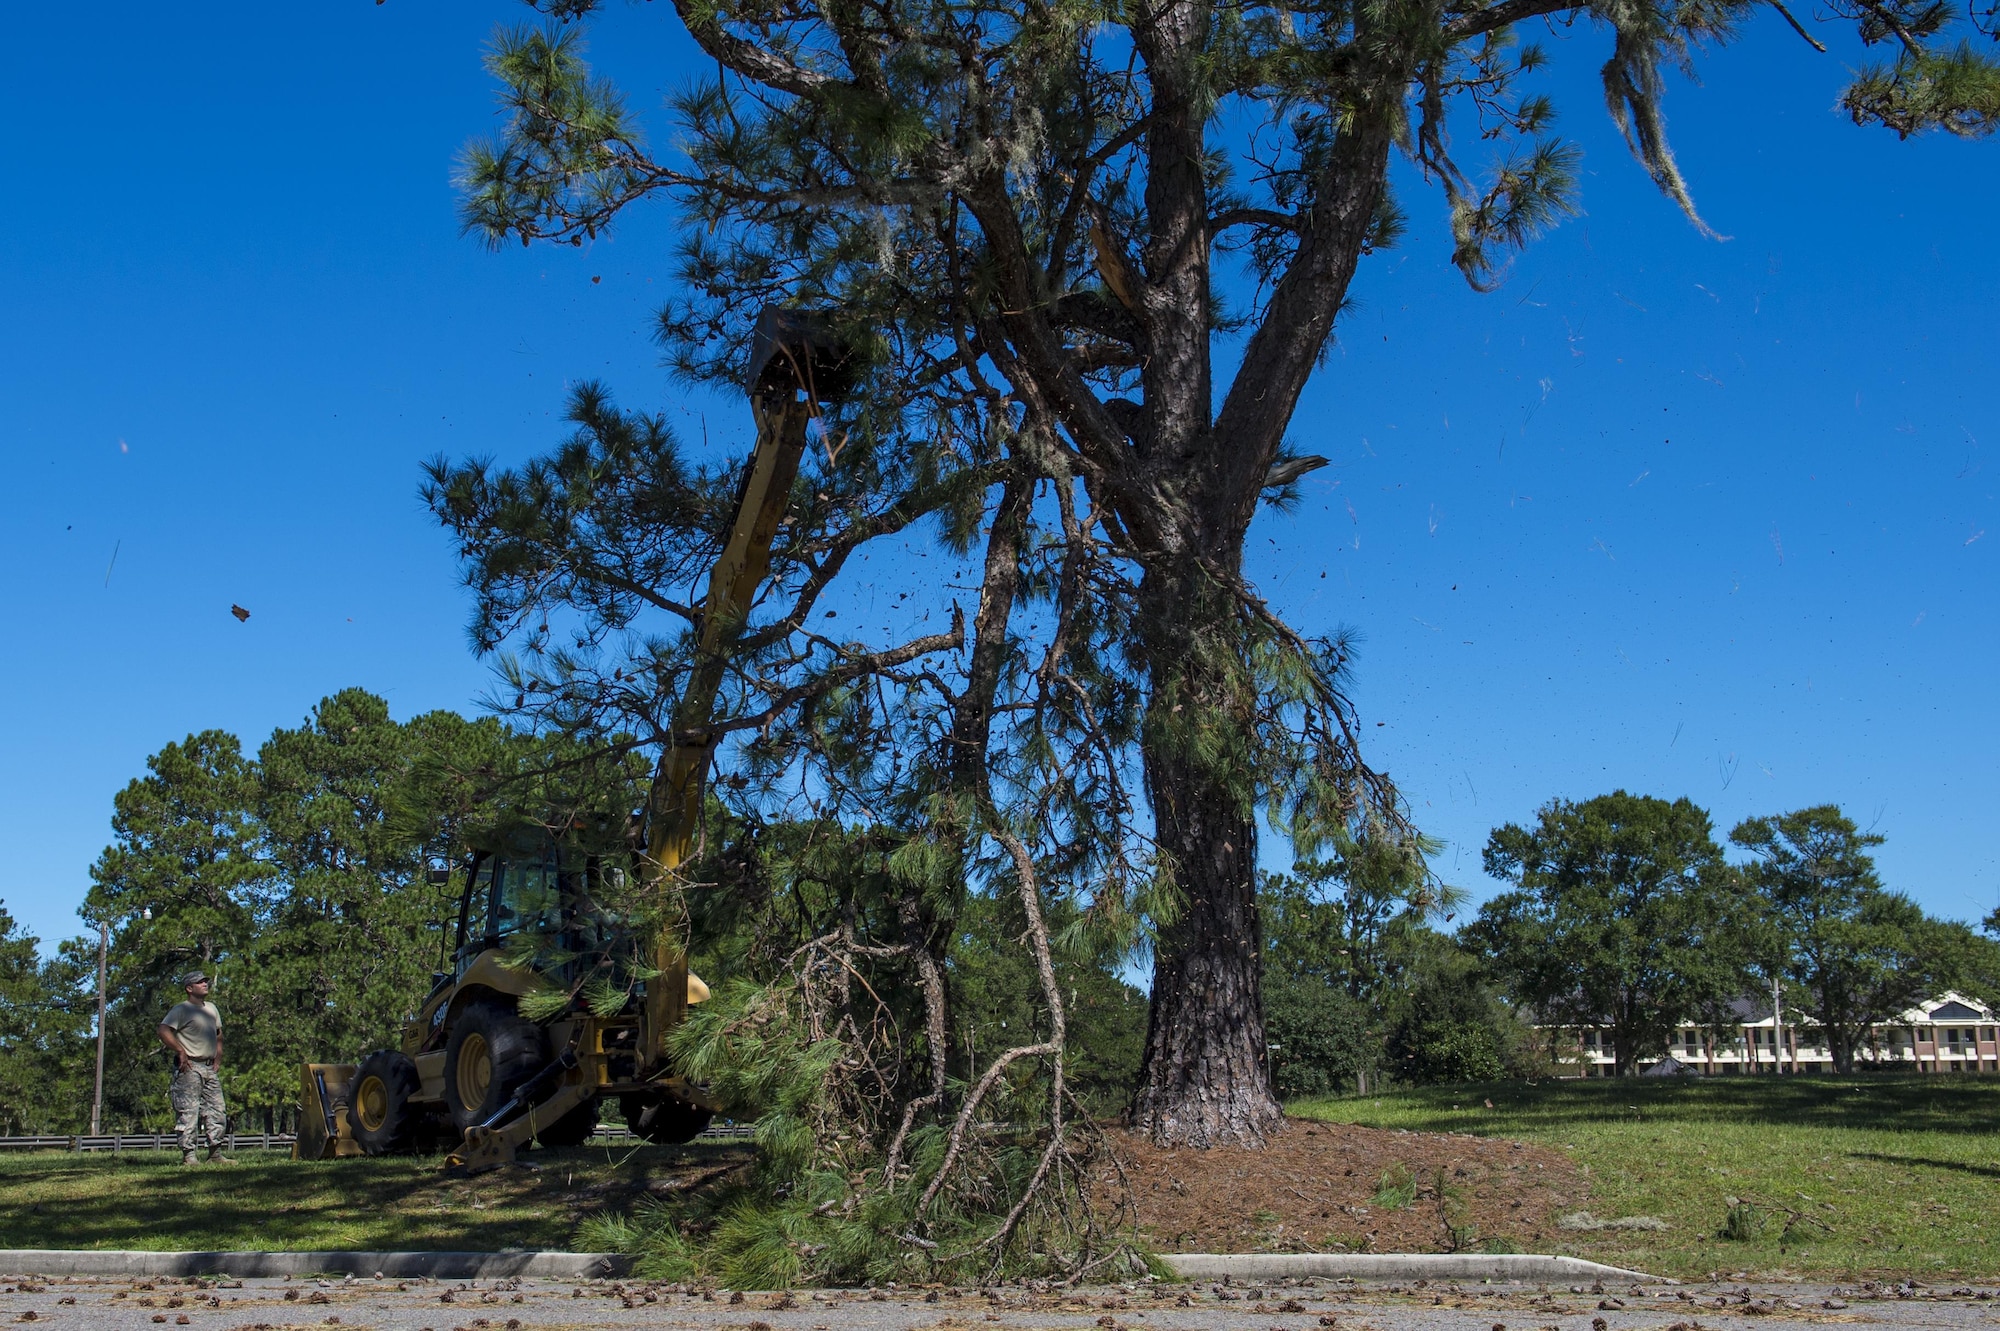 U.S. Air Force Master Sgt. Chris Moffett and Senior Airman Jesse Steinberg, heavy equipment operators with the 628th Civil Engineer Squadron, tear down broken tree limbs after  Hurricane Mathew swept through Joint Base Charleston, S.C., Oct. 9, 2016.  All non-essential personnel evacuated the area, but returned after disaster response coordinators assessed damage and verified a safe operating environment. 